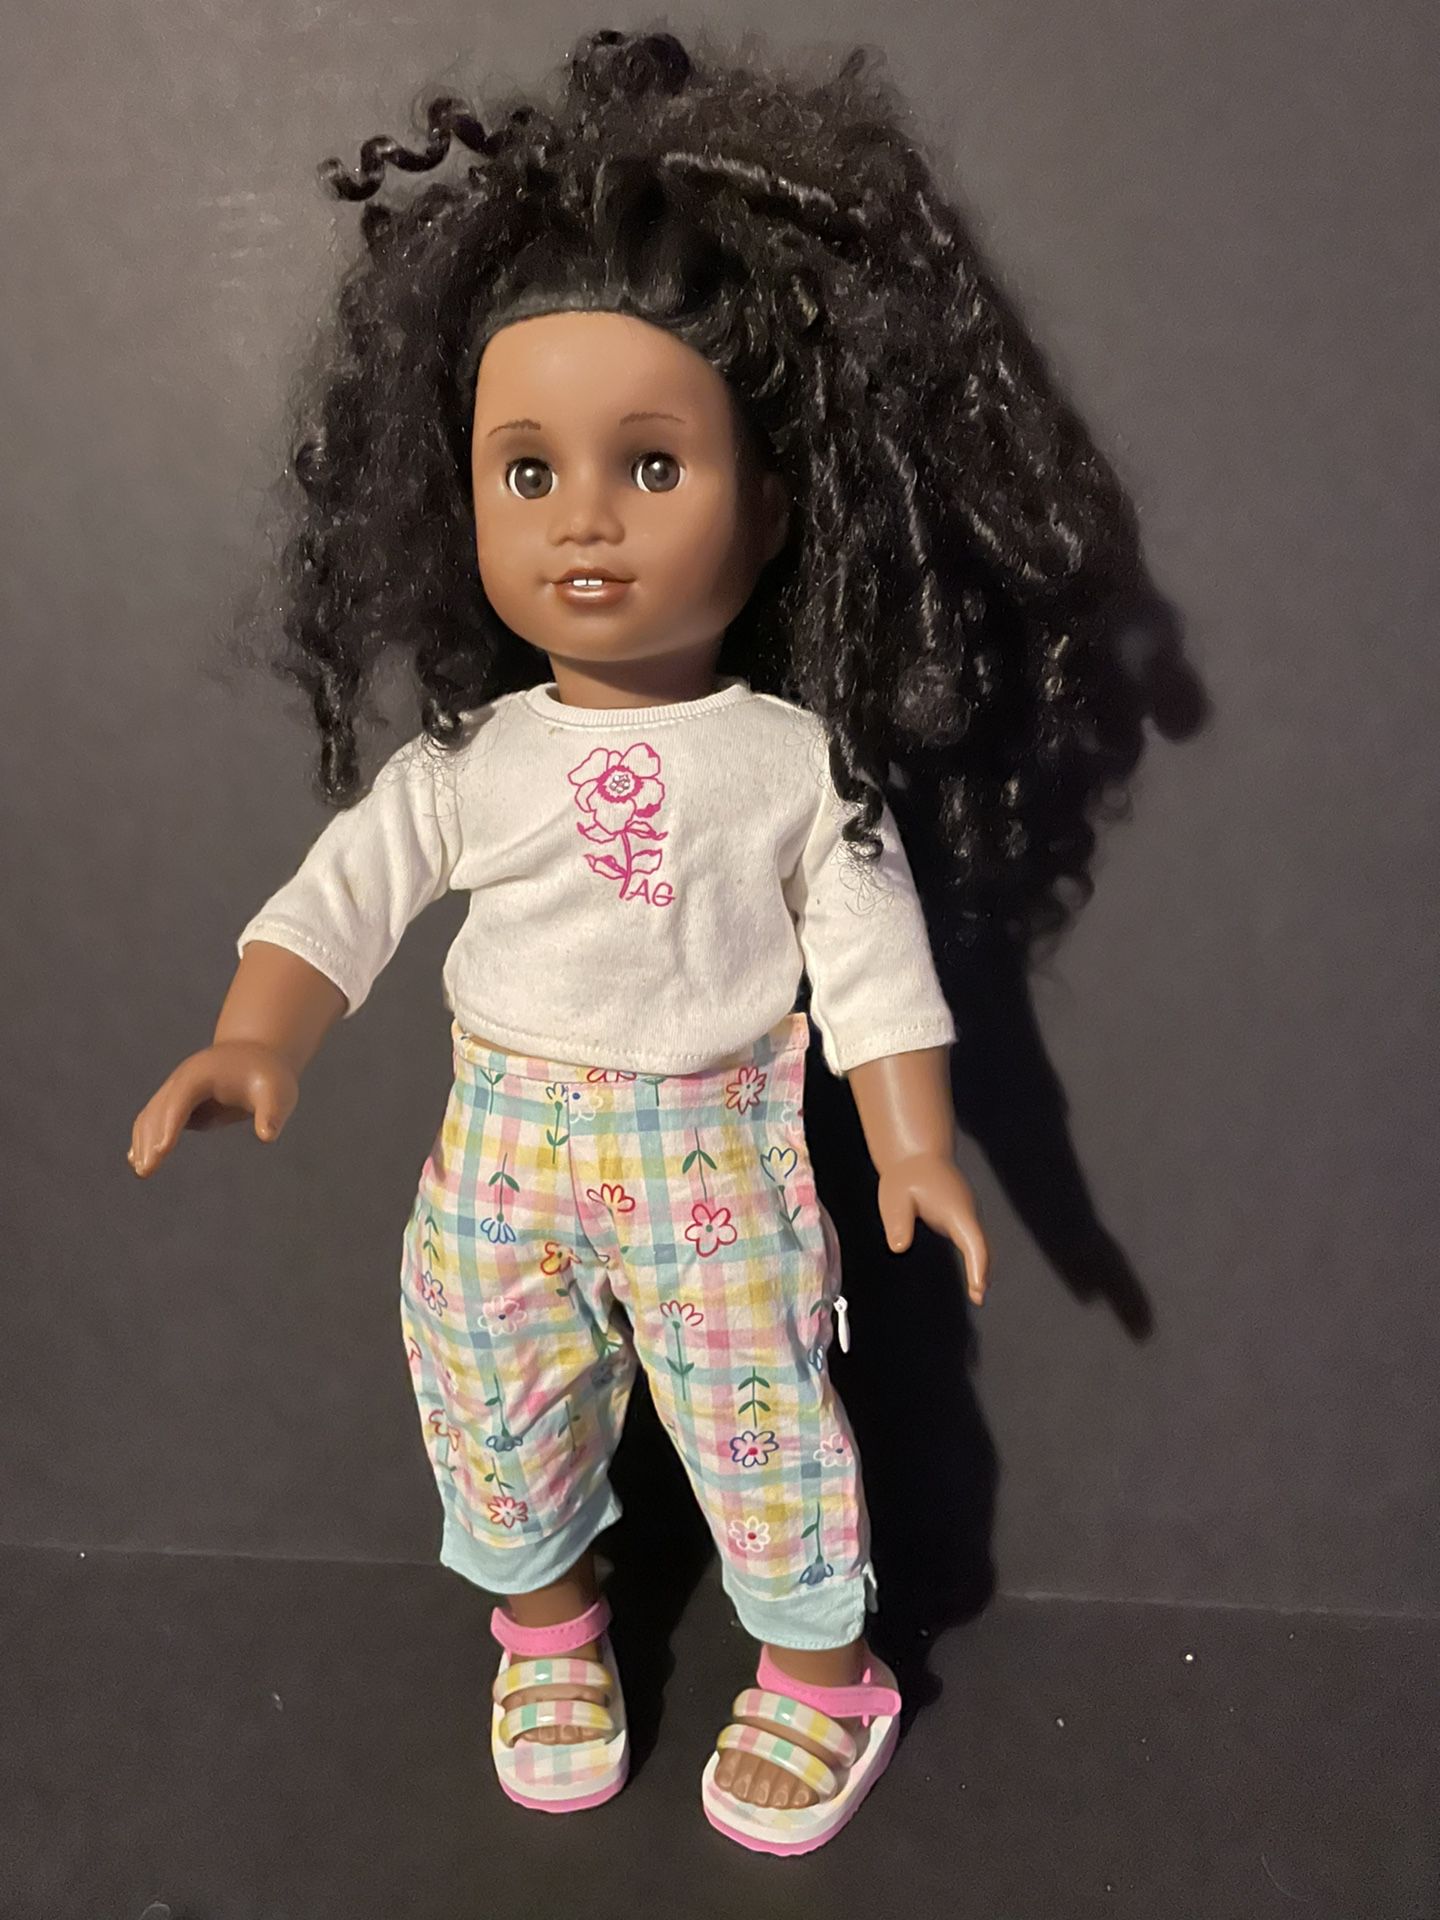 American Girl Truly Me Doll with Cute Outfit $50